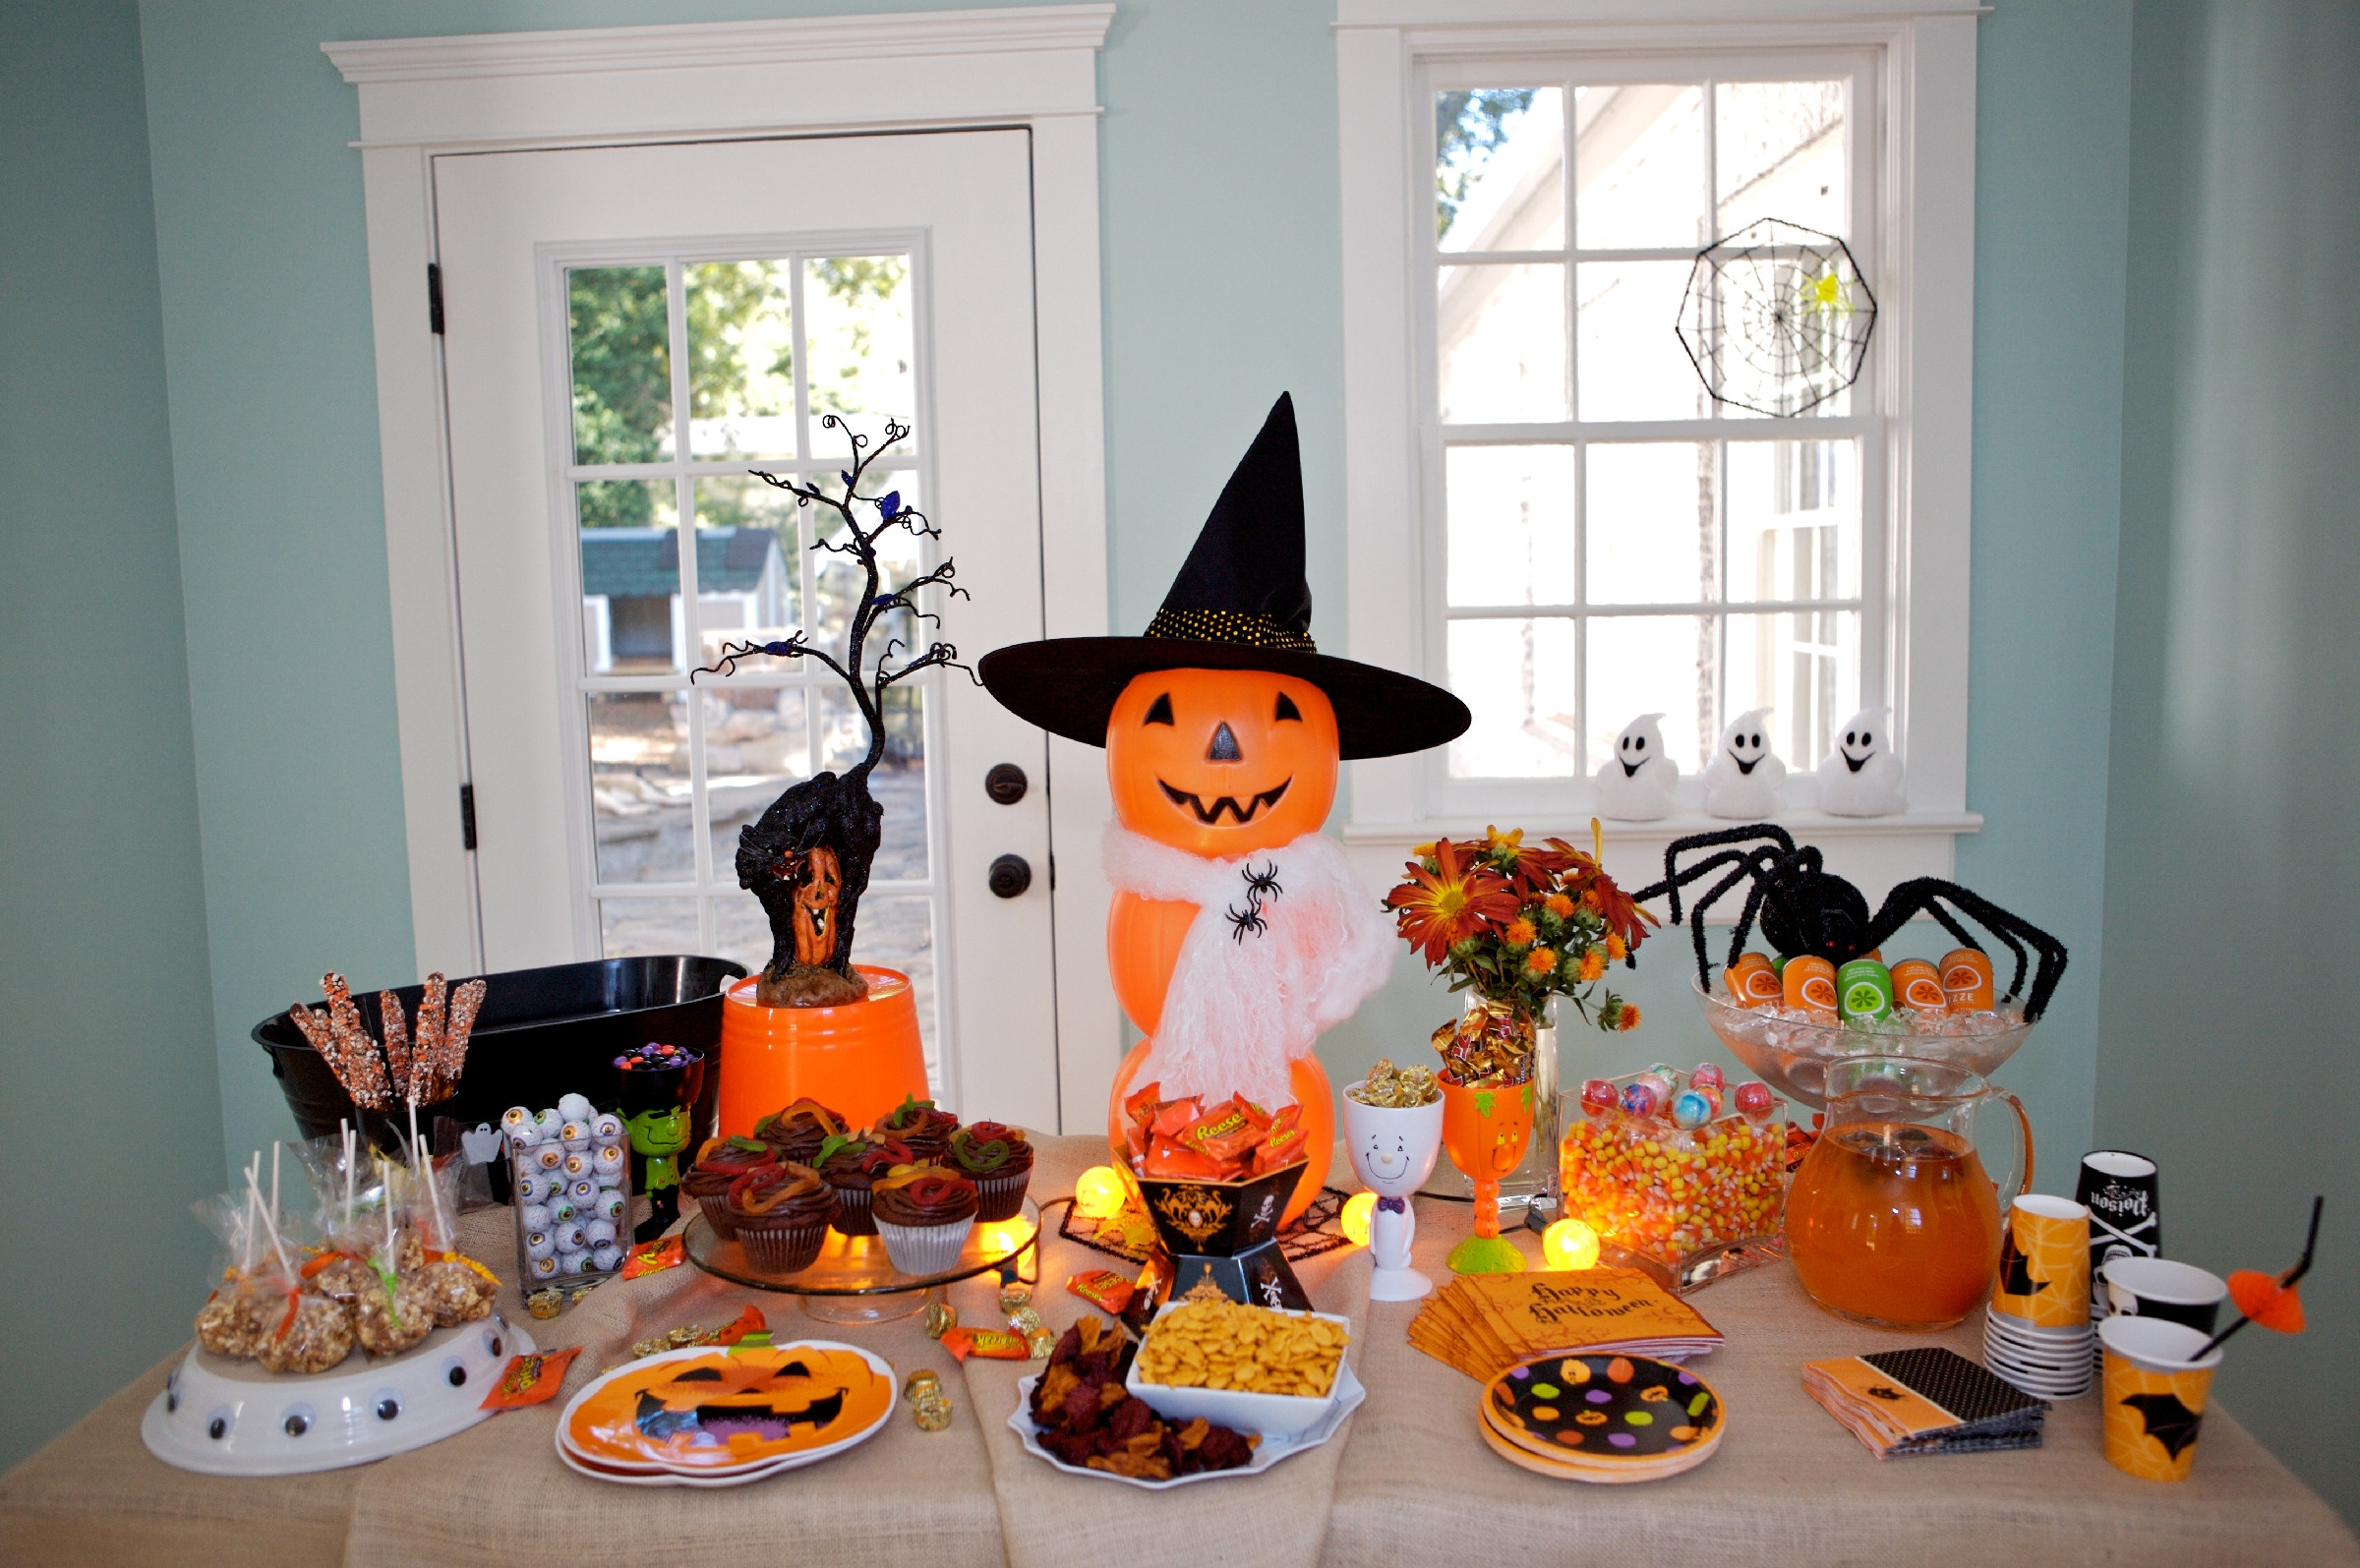 Table Decorating Ideas For Halloween Party
 Martie Knows Parties BLOG Host a Neighborhood Halloween Party